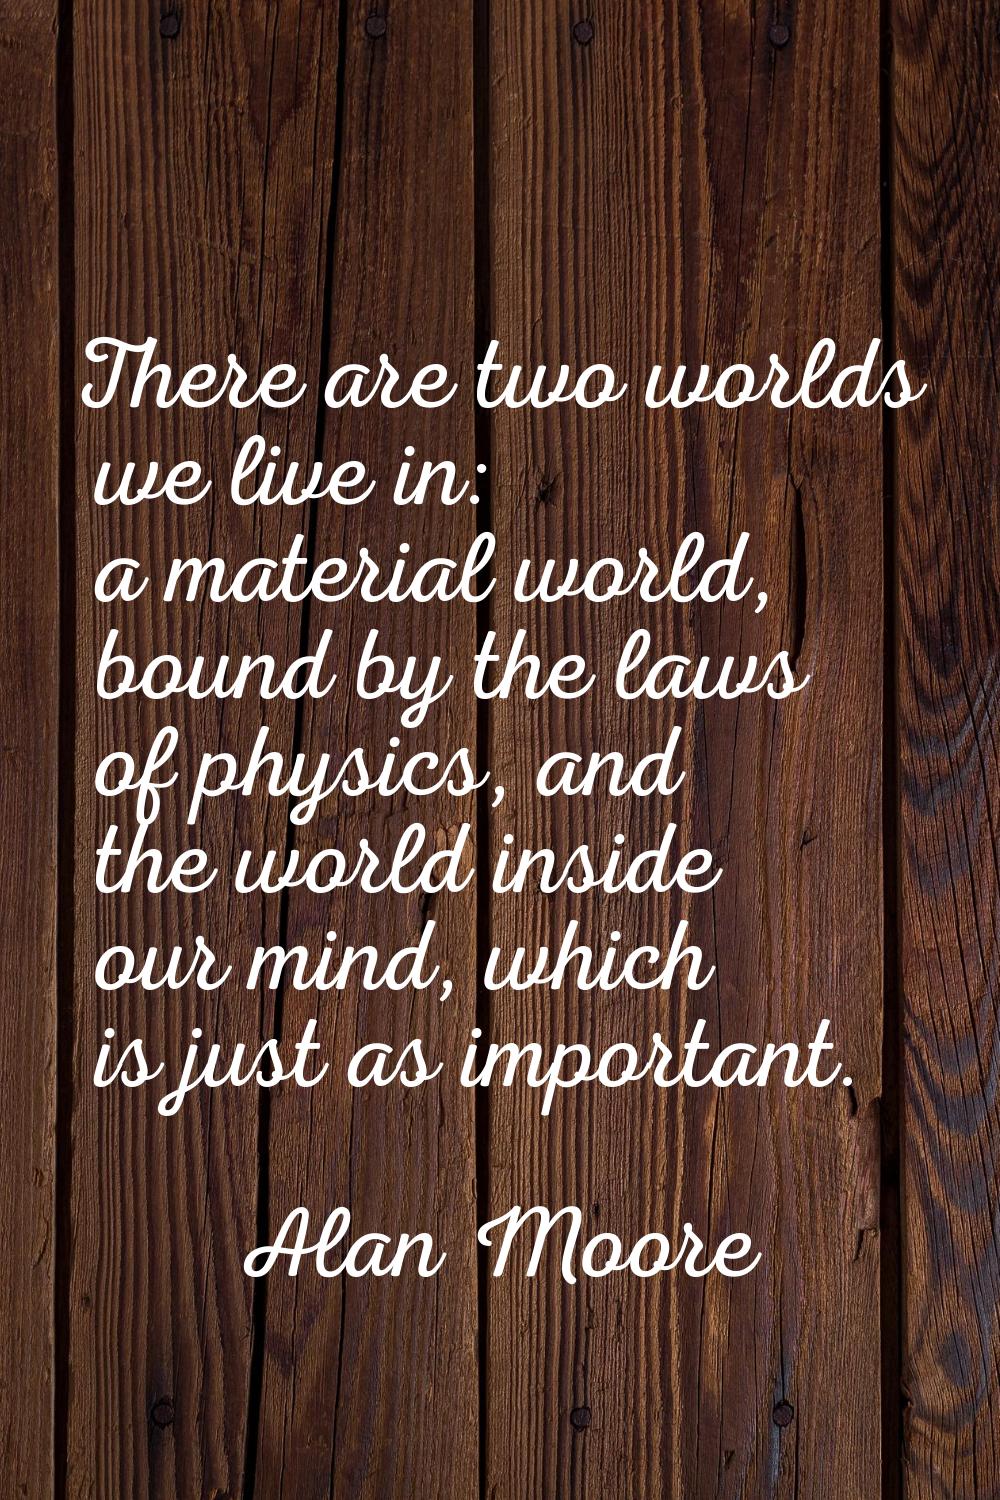 There are two worlds we live in: a material world, bound by the laws of physics, and the world insi